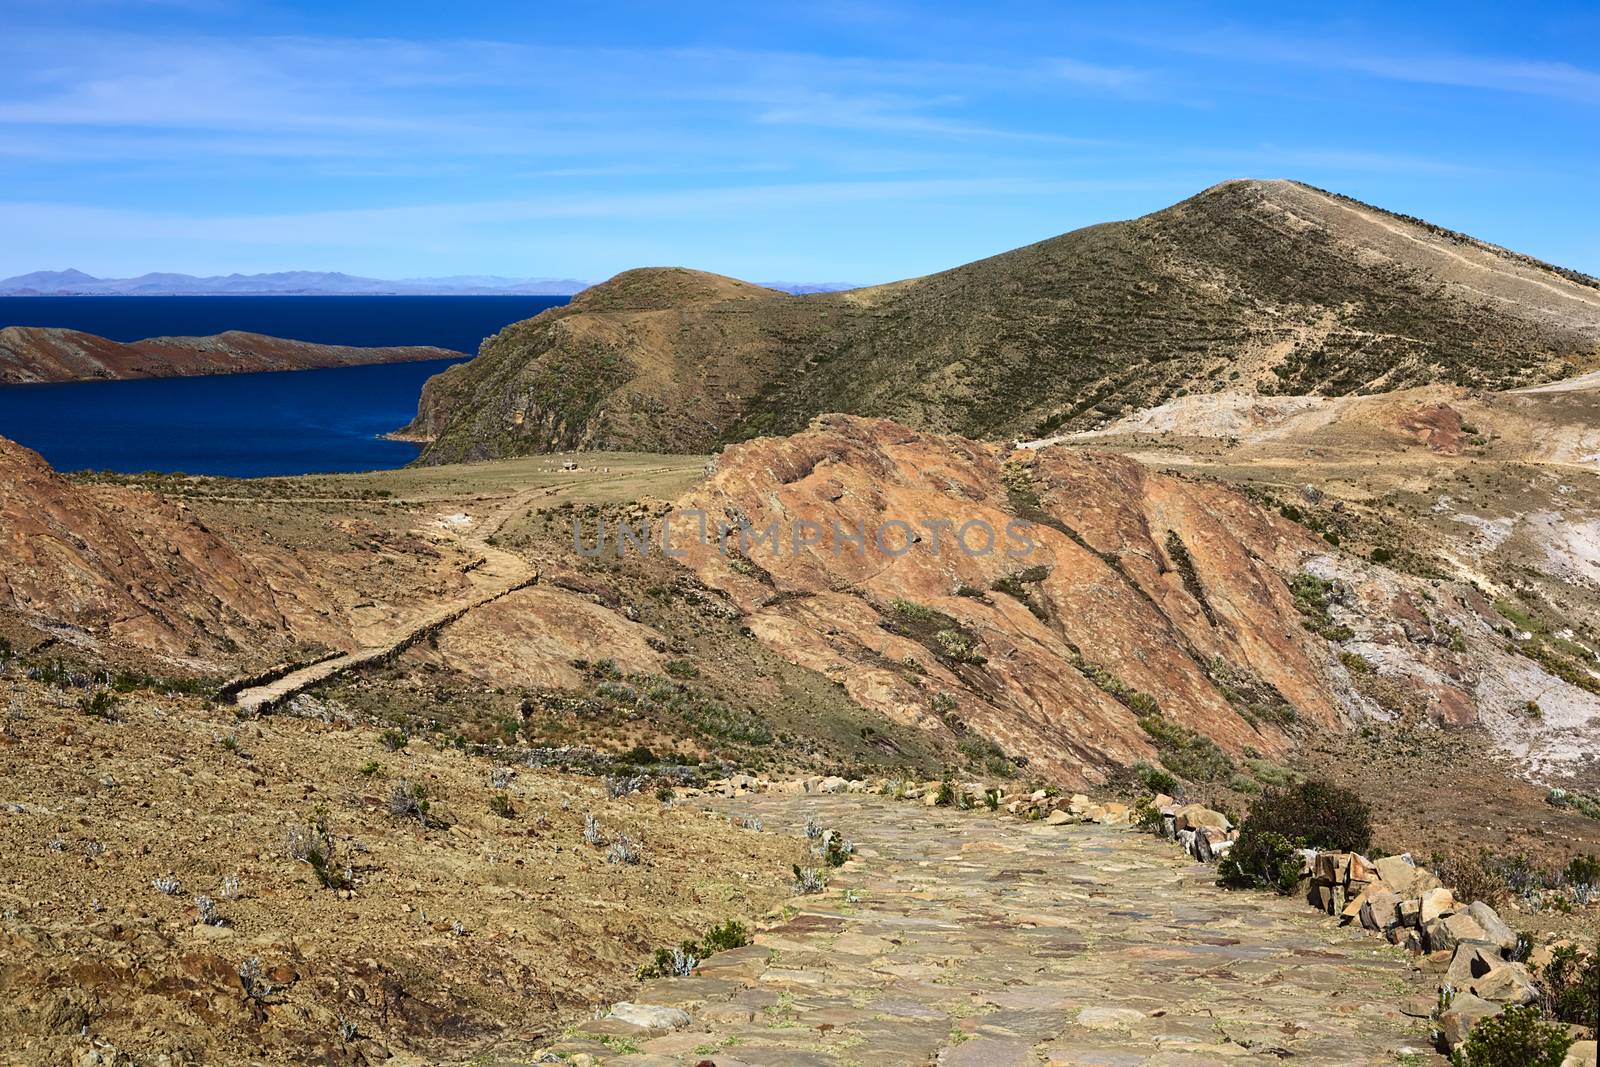 Rocky path leading to the archaeological site of the Ceremonial Table (Mesa Ceremonial) and the Rock of the Puma (Titicaca) on Isla del Sol (Island of the Sun) in Lake Titicaca, which is a popular travel destination in Bolivia